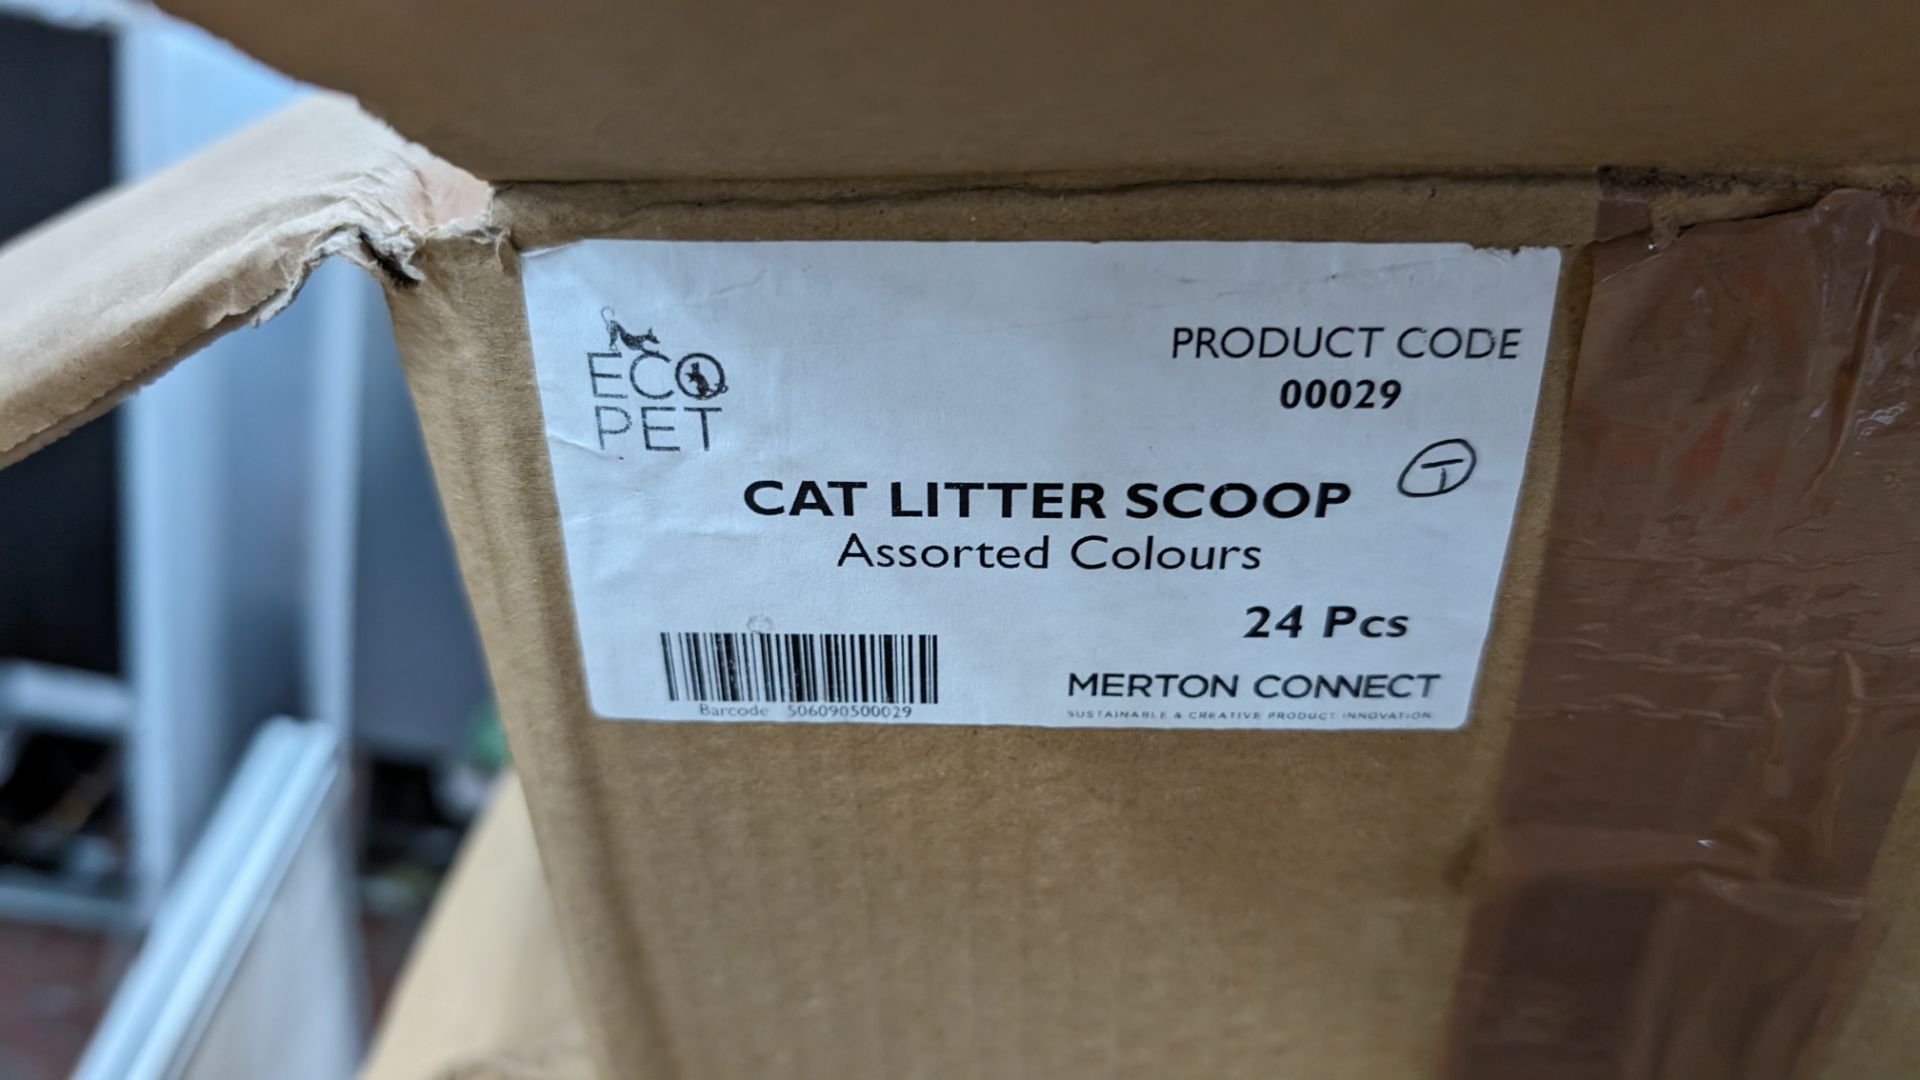 Approximately 144 off cat litter scoops in assorted colours - 6 cartons - Image 9 of 10